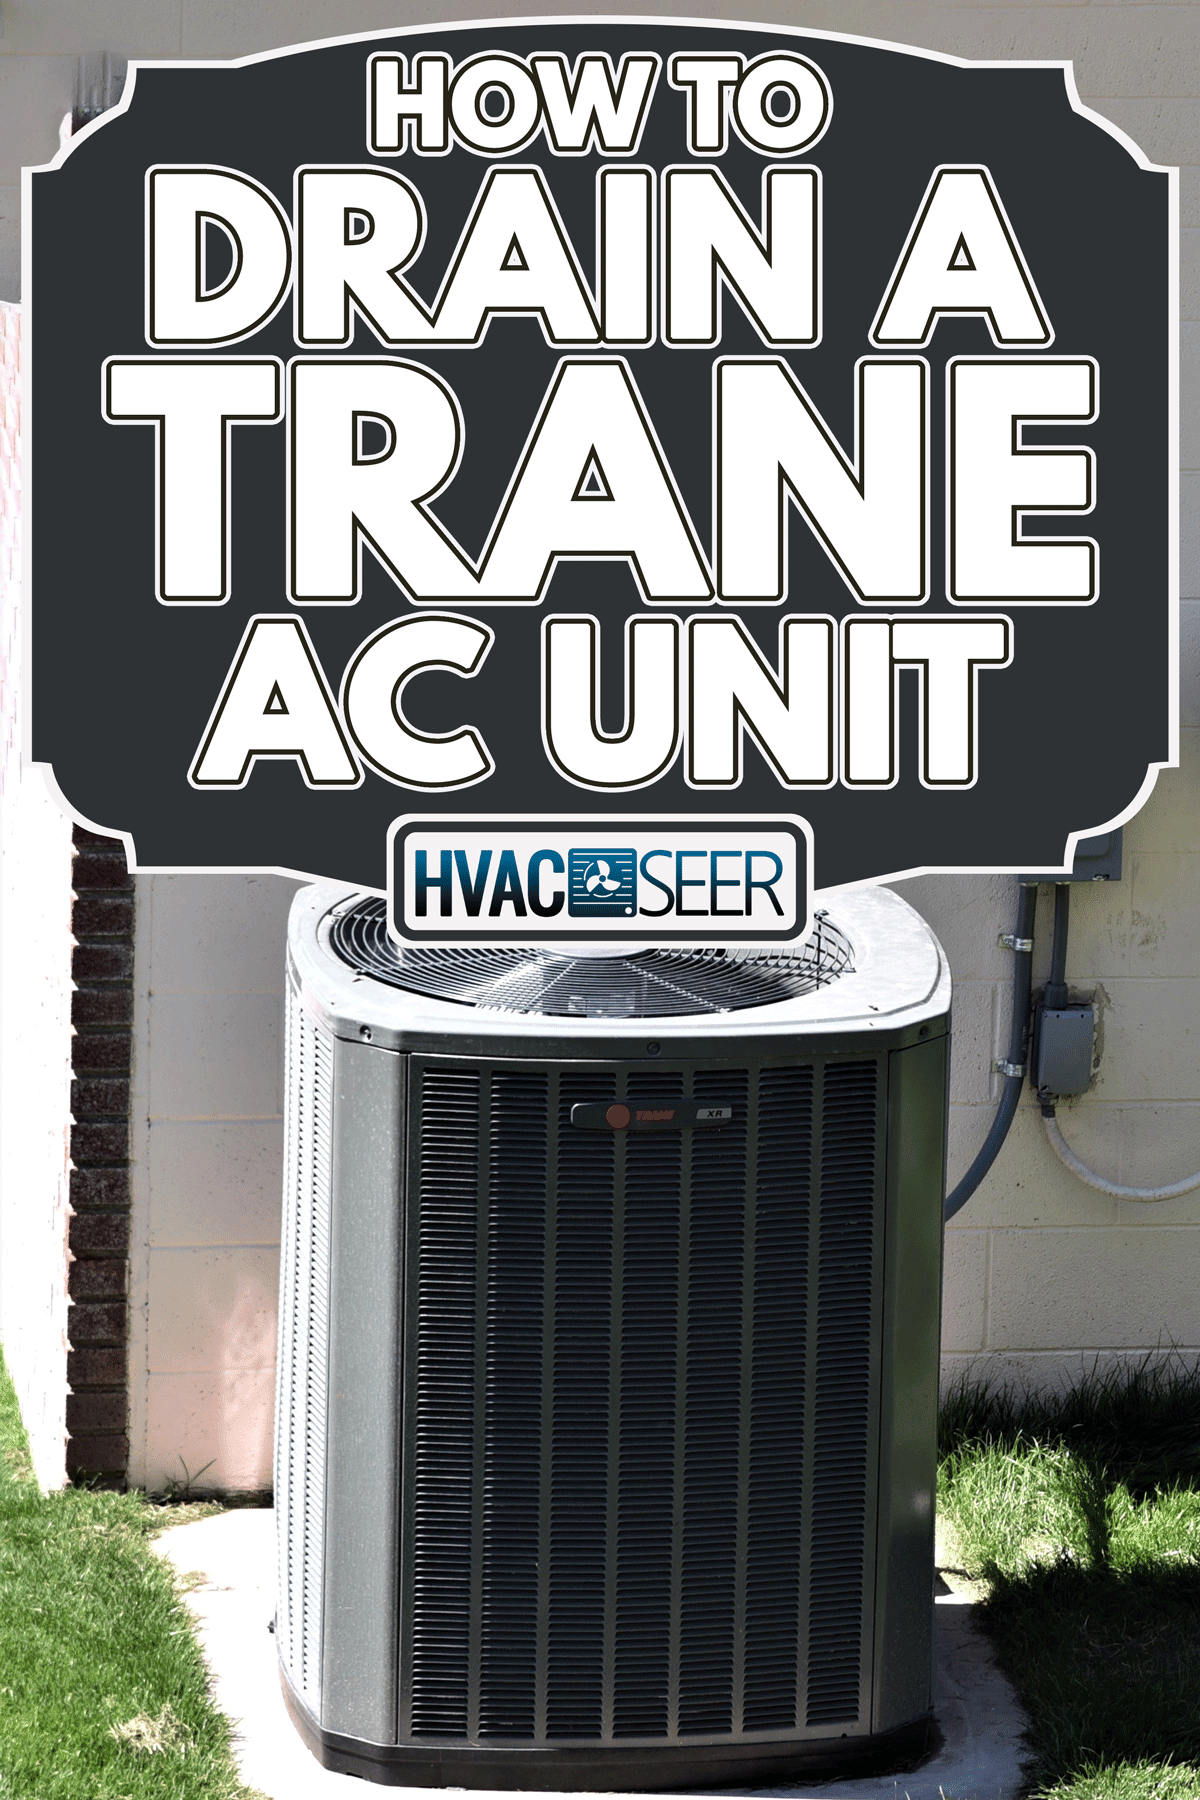 Trane air conditioner outside the house, How To Drain A Trane AC Unit